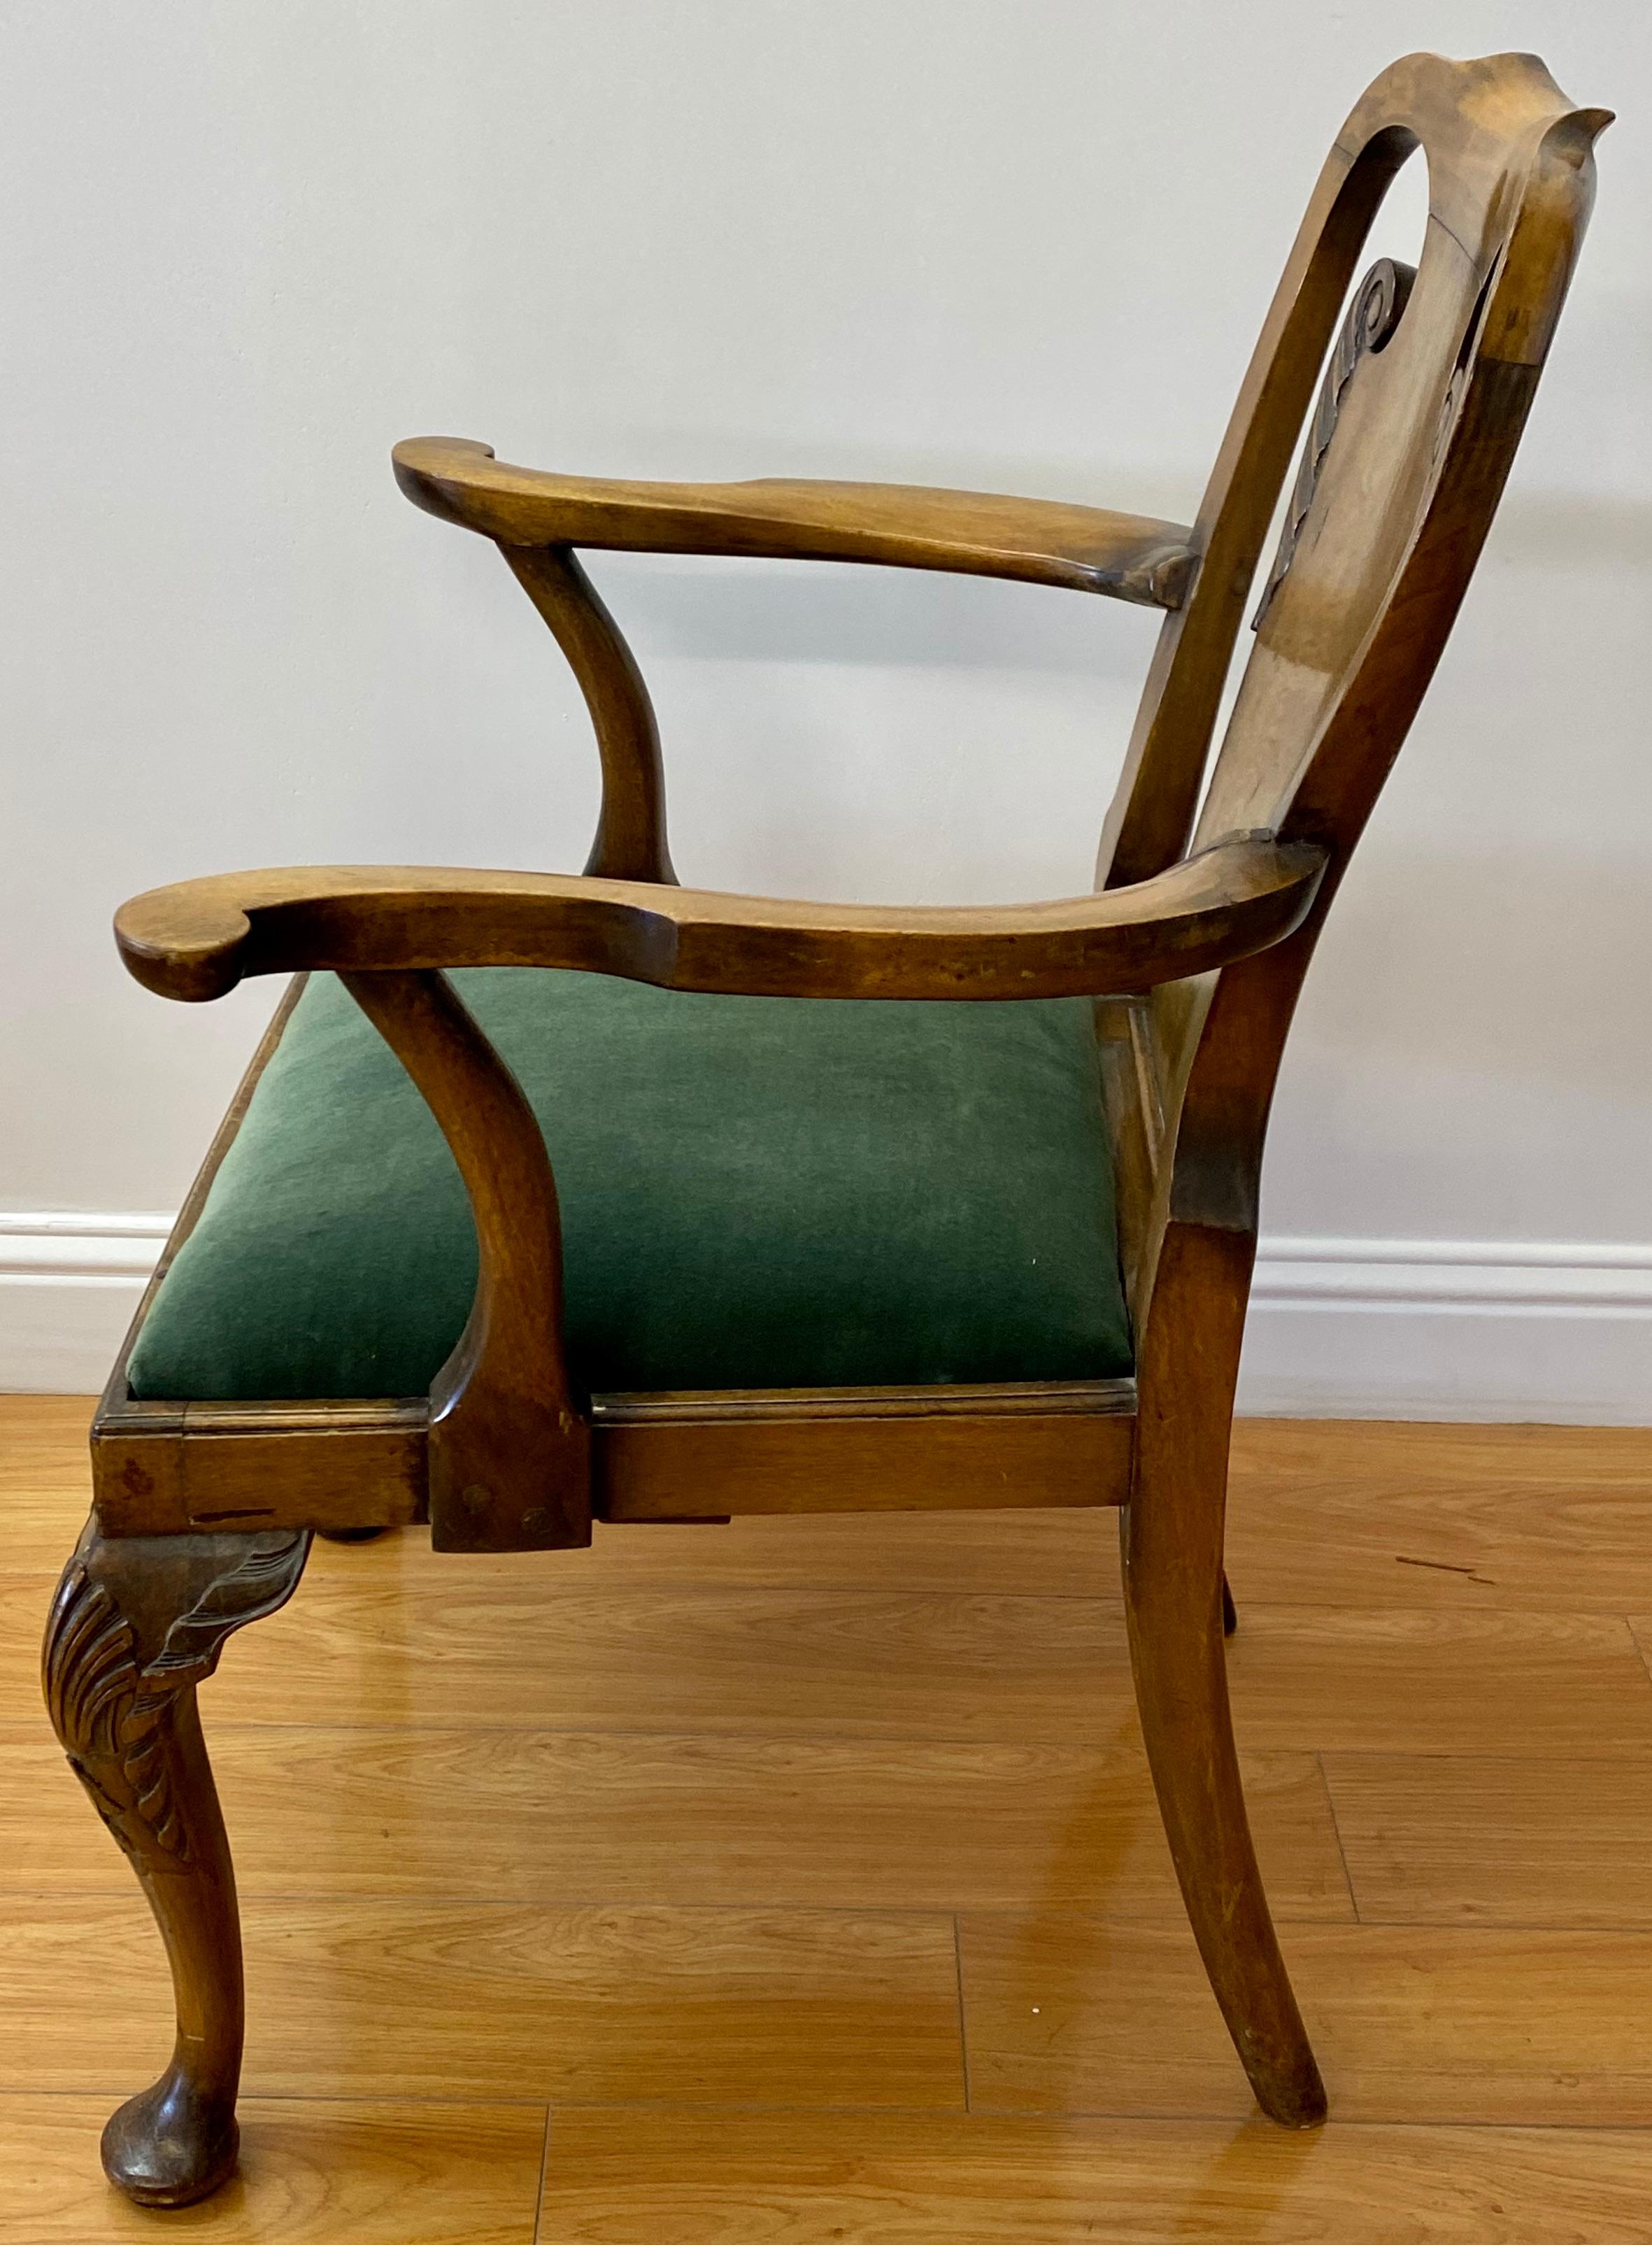 Hand-Carved Queen Anne Style Carved Mahogany Armchair, circa 1830